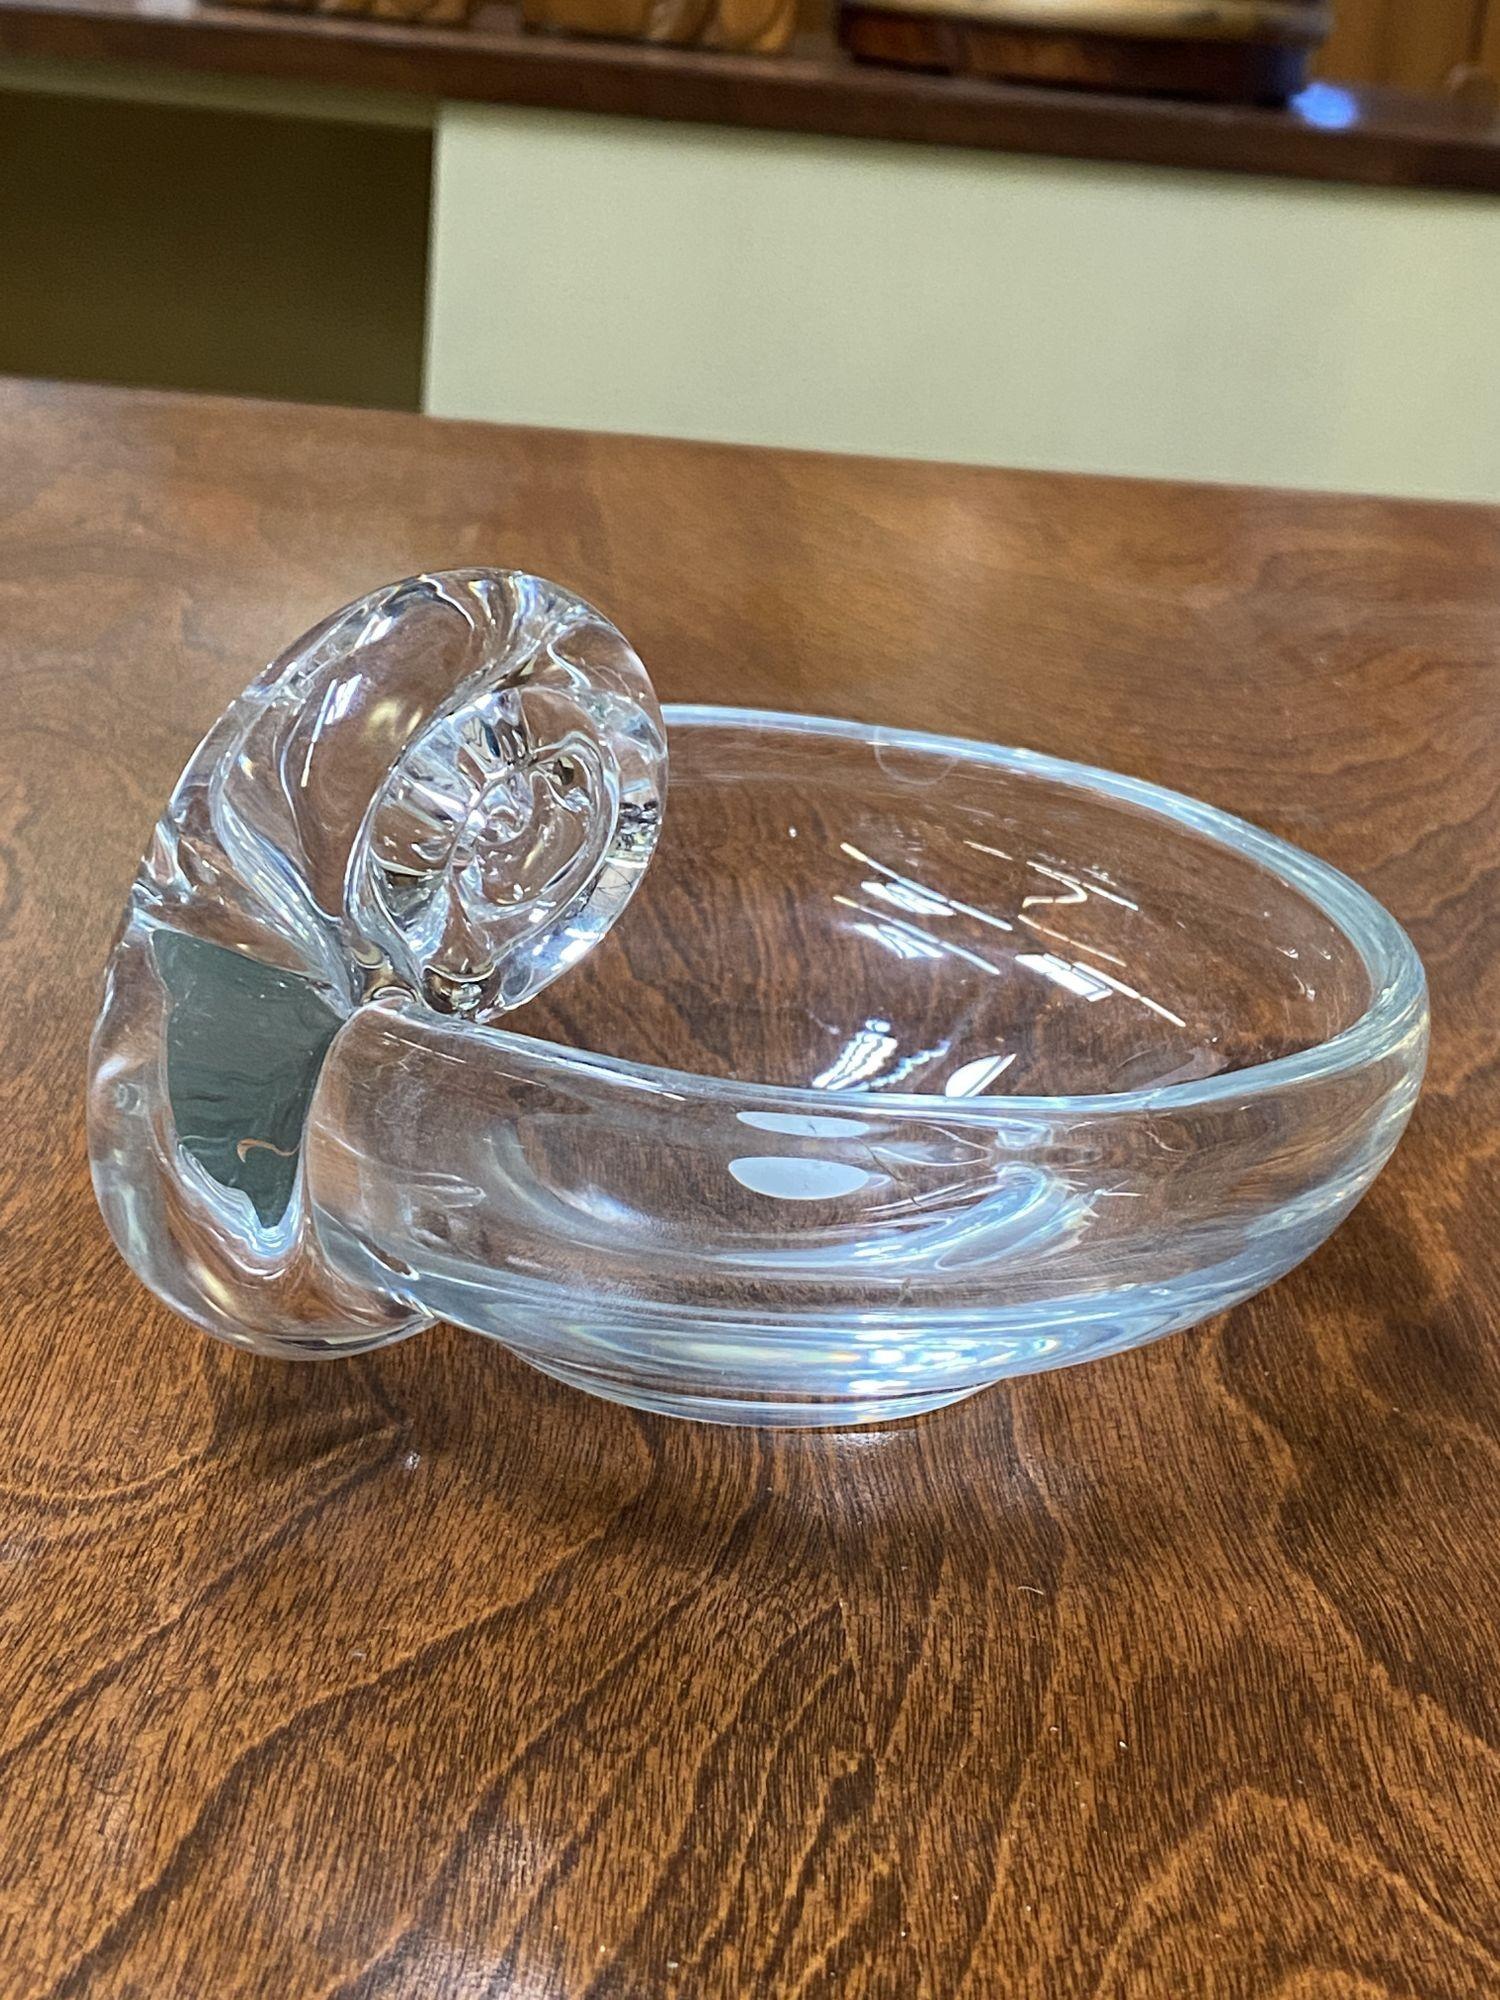 American Art Deco Spiral Handblown Crystal Glass Spiral Ring Tray For Sale